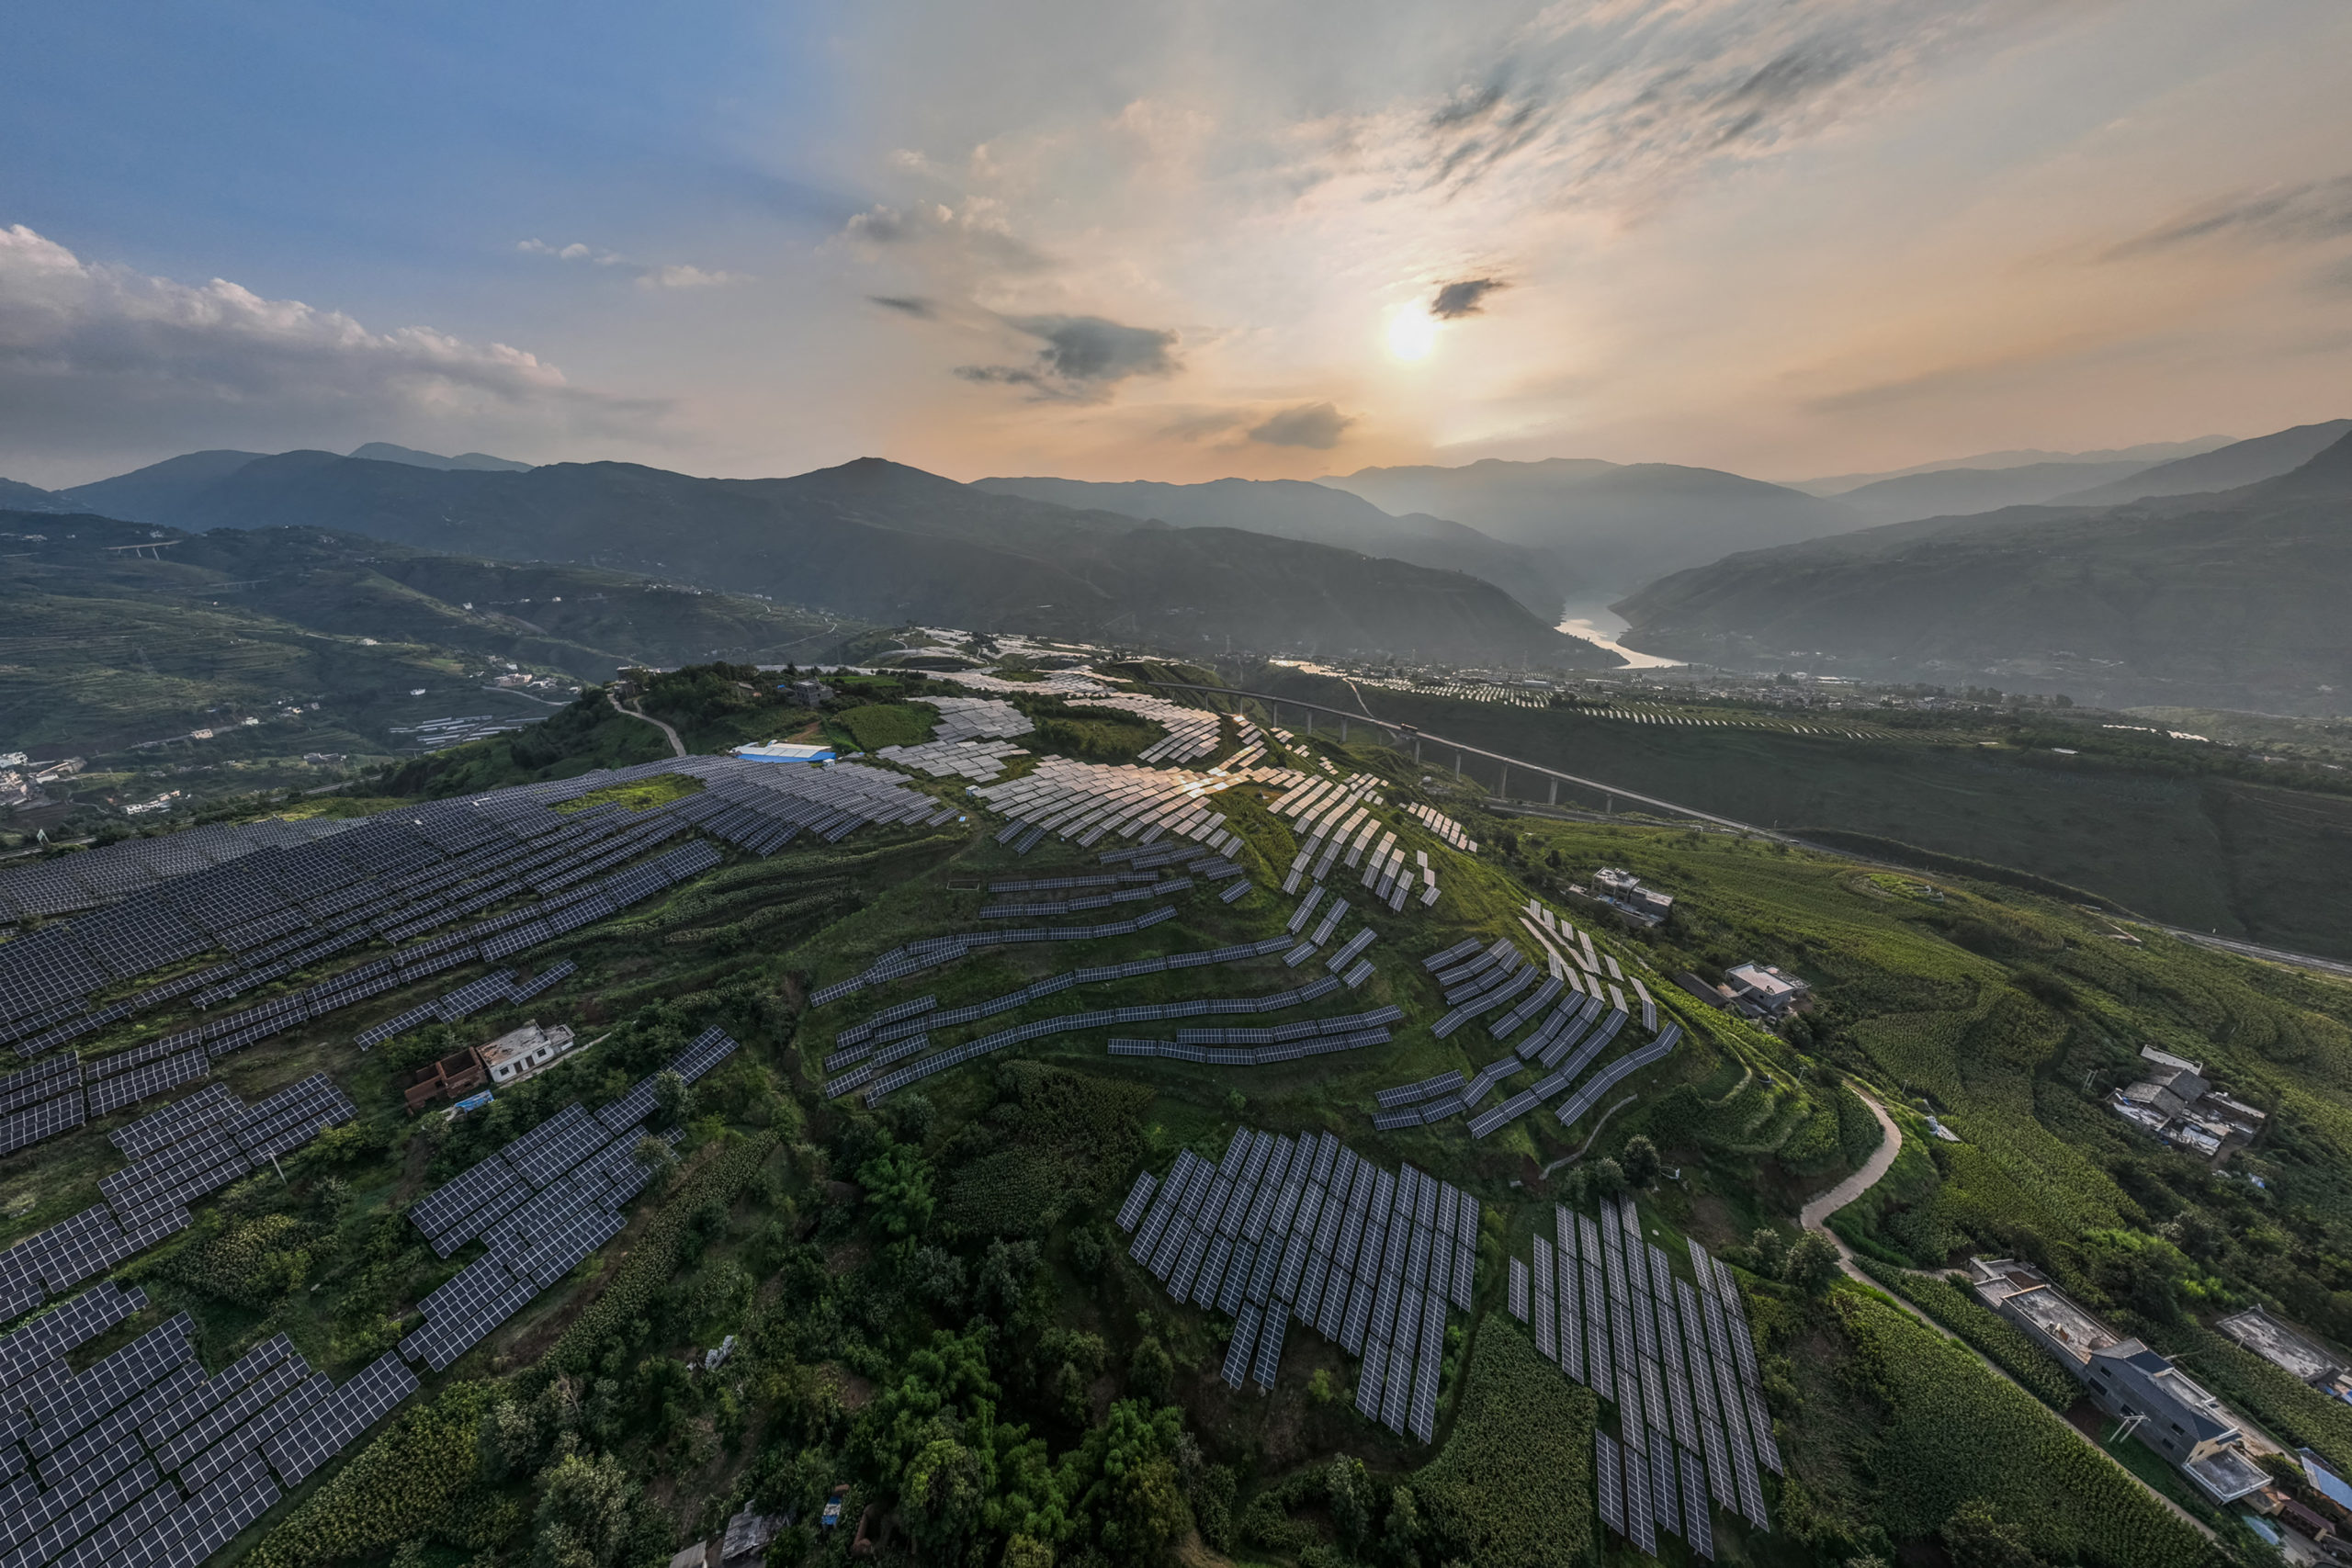 TOPSHOT - This photo taken on August 16, 2022 shows solar panels among Sichuan pepper field in Bijie, in China's southwestern Guizhou province